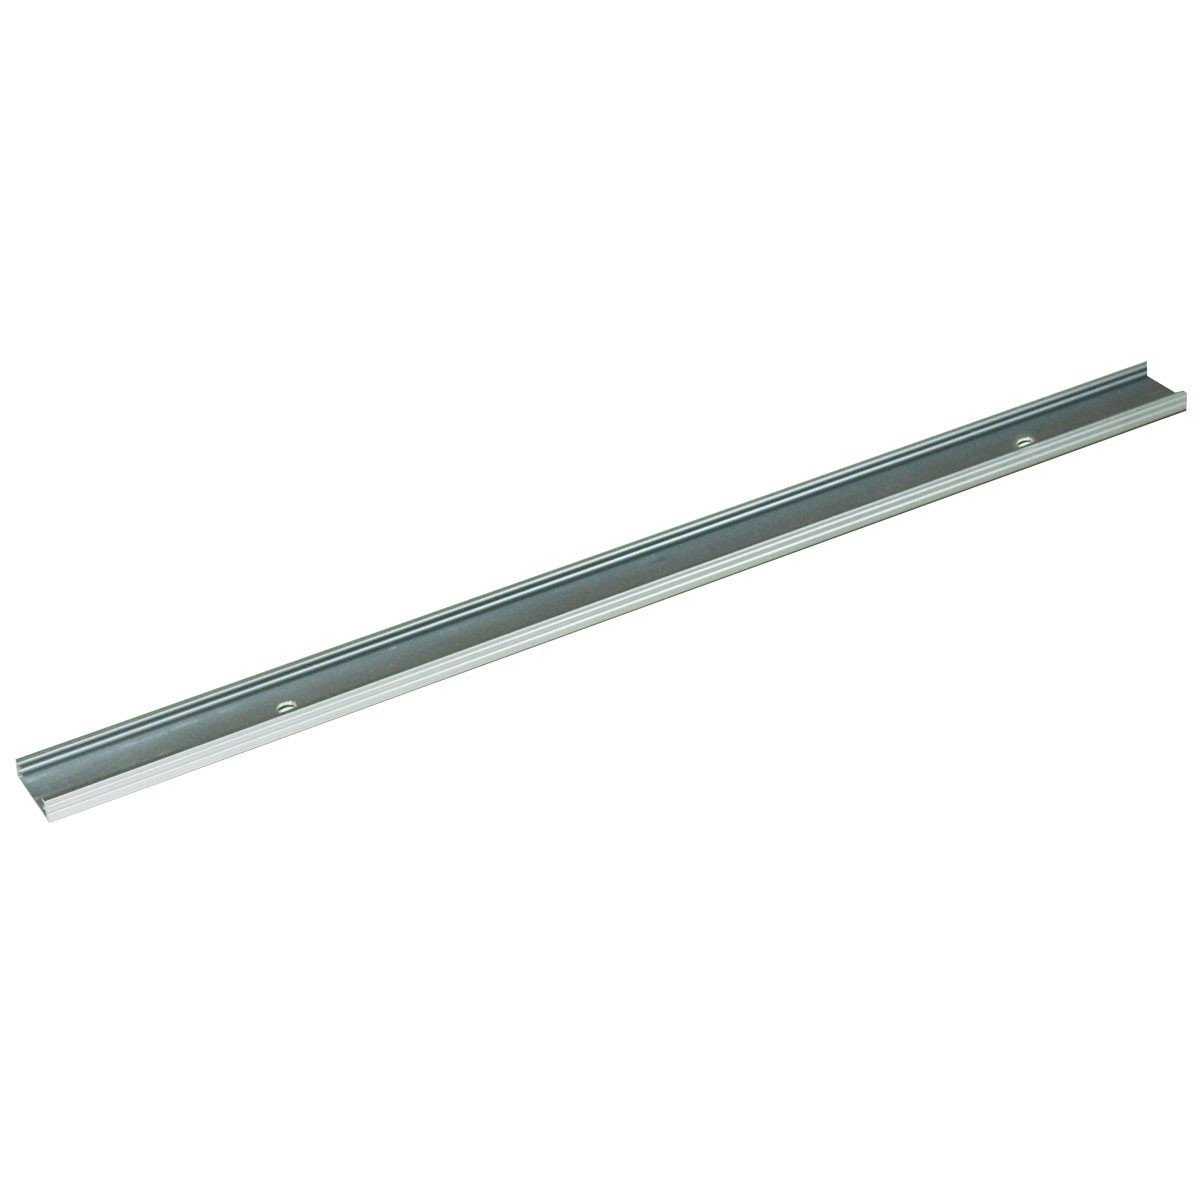 4' Aluminum Channel Architectural Nora Lighting 